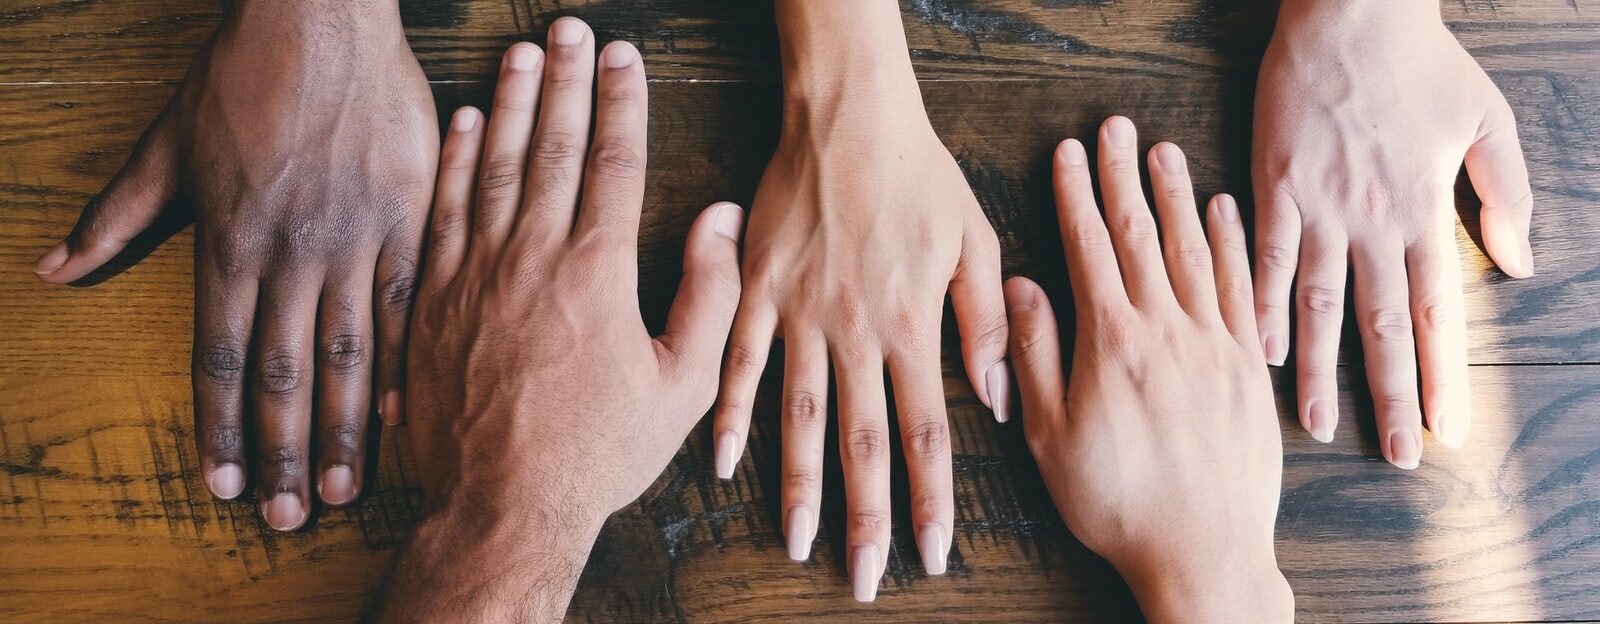 five human hands on brown surface